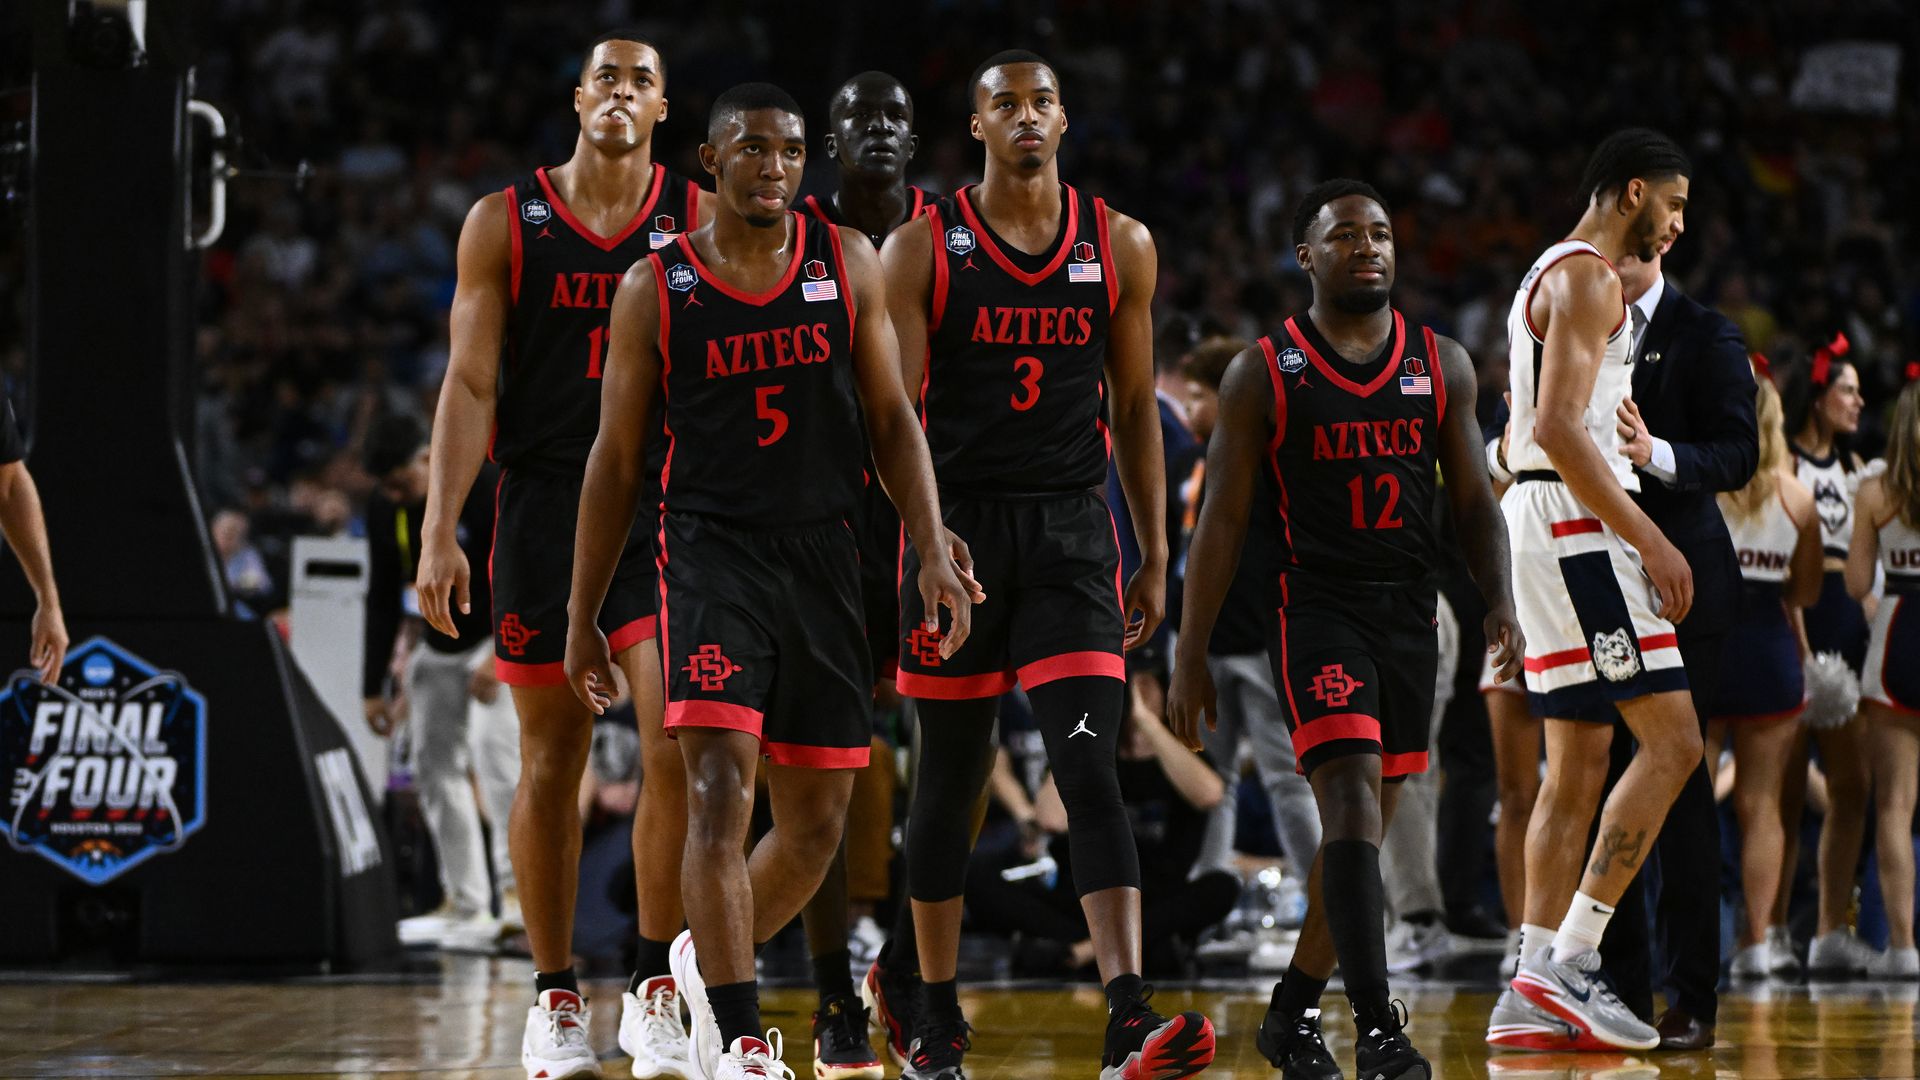 Five basketball players in black and red uniforms walk on the court together. 